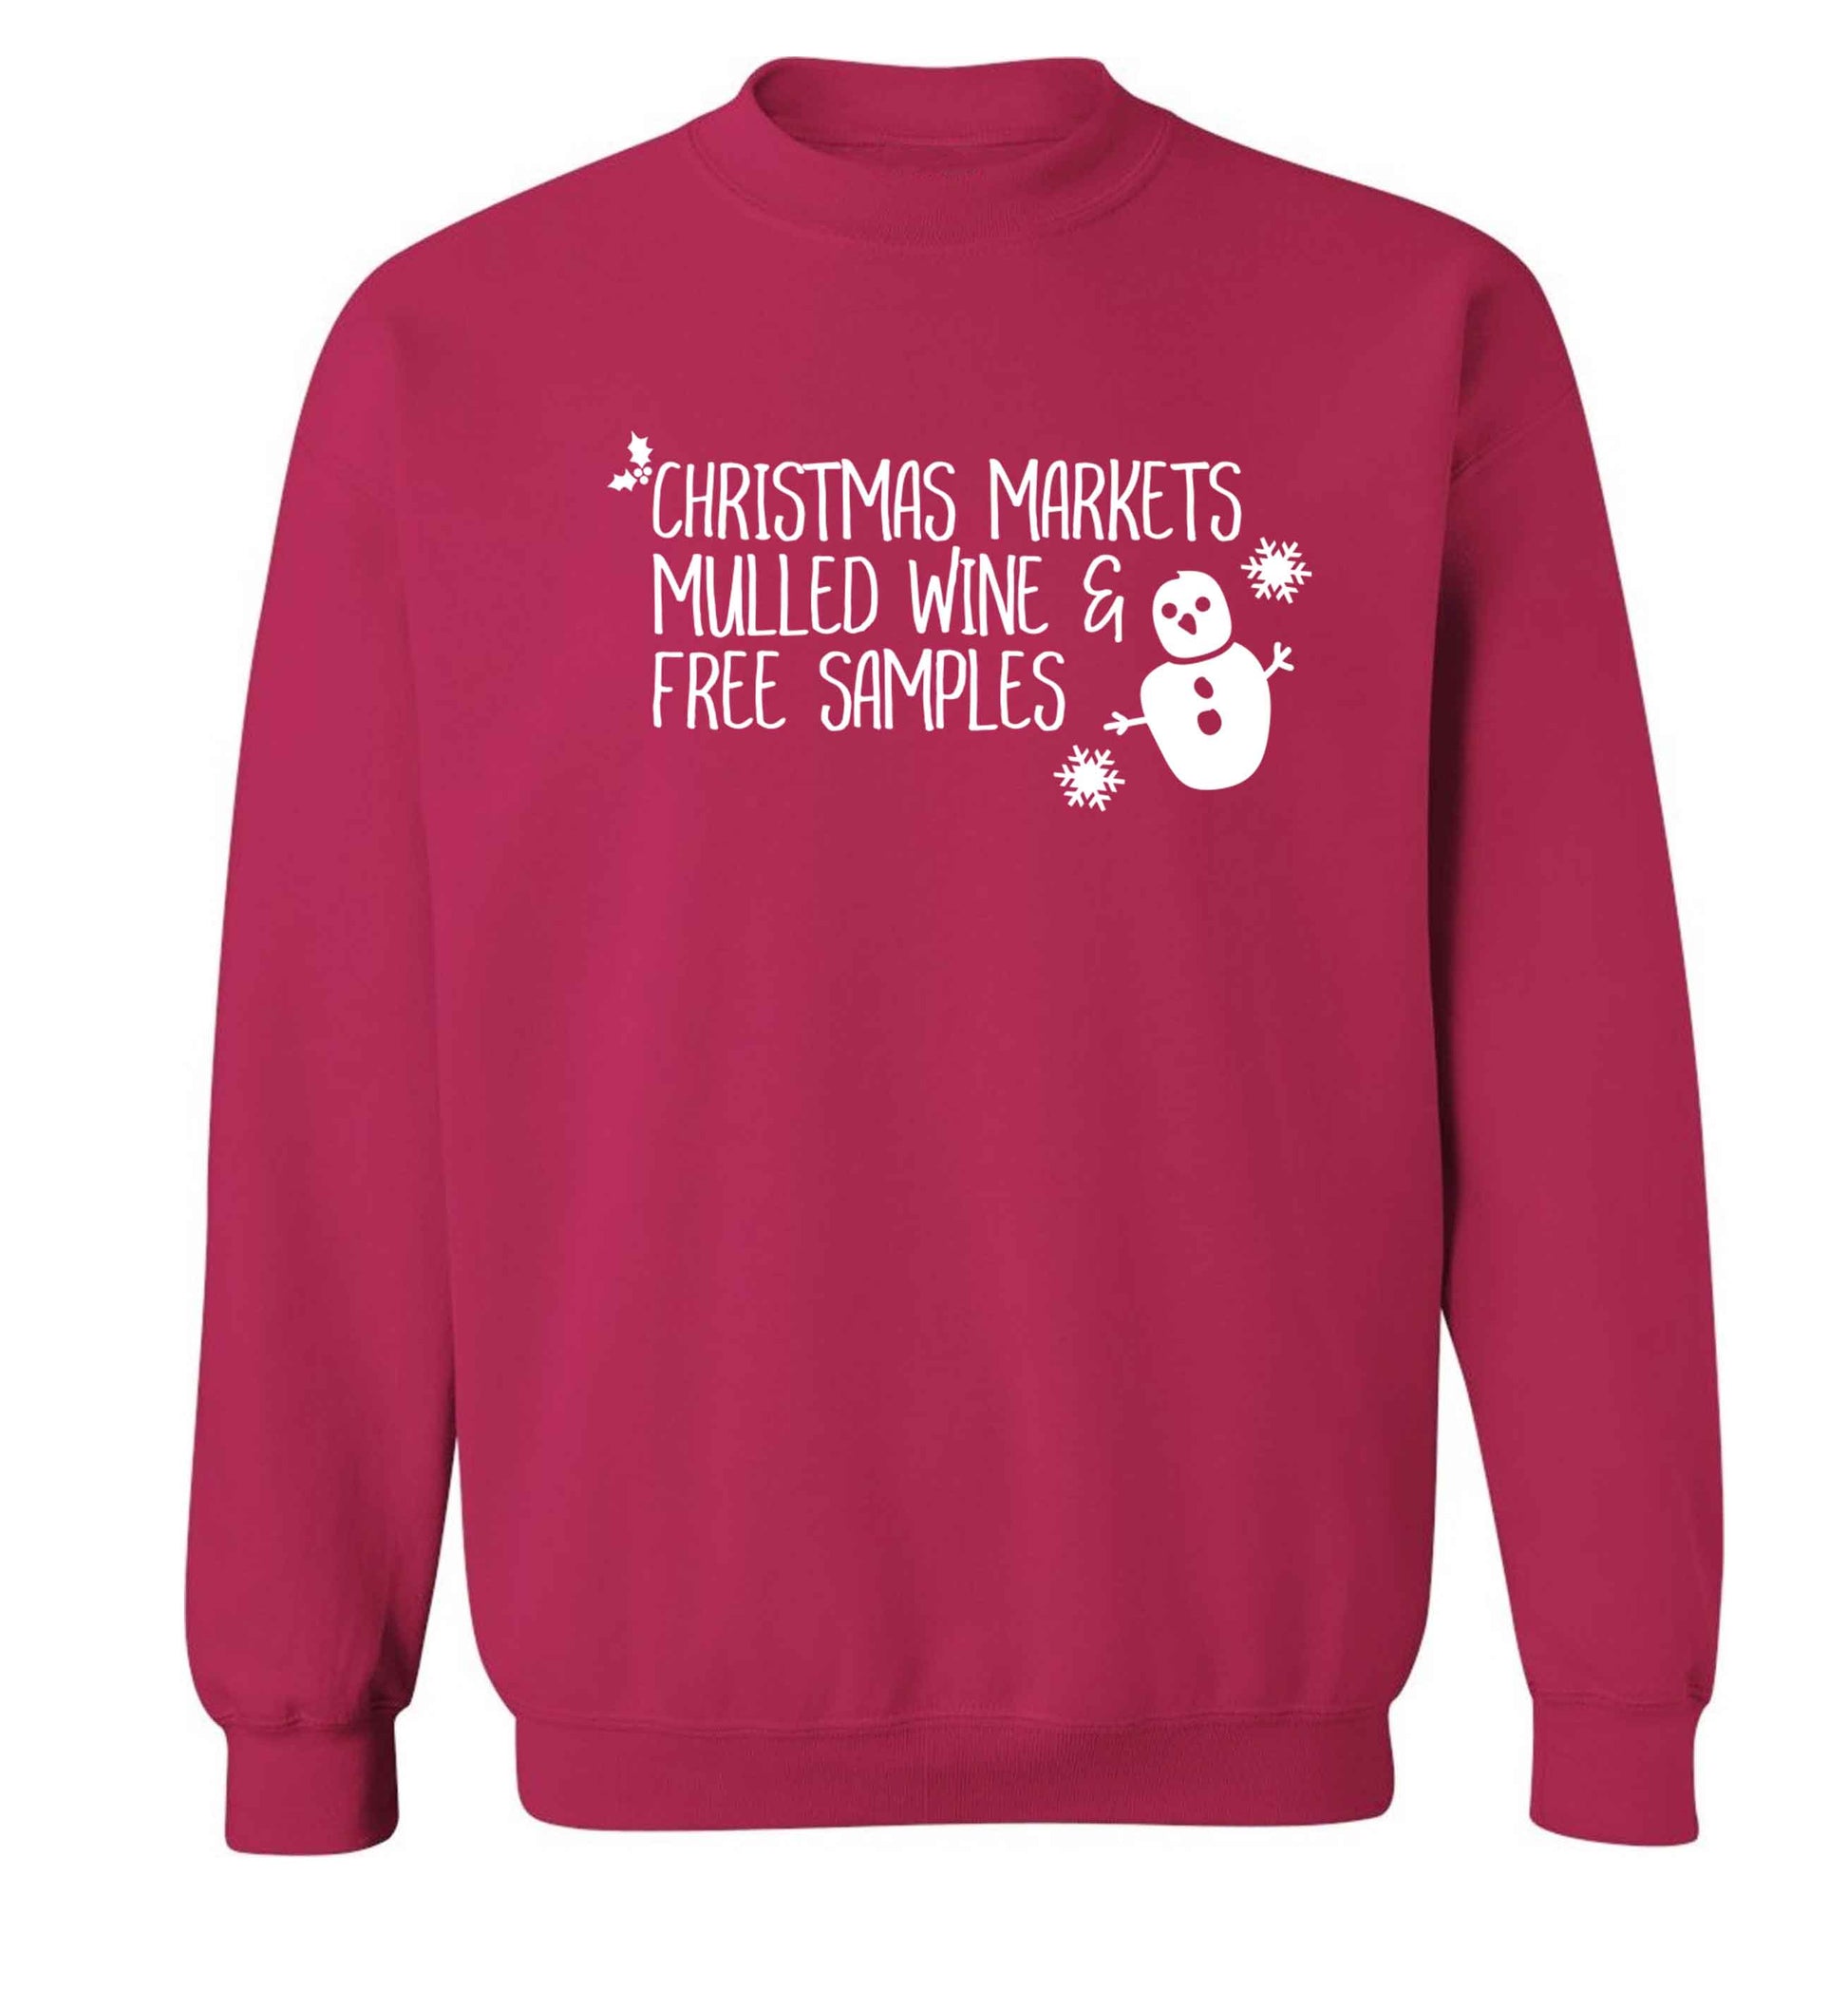 Christmas market mulled wine & free samples Adult's unisex pink Sweater 2XL